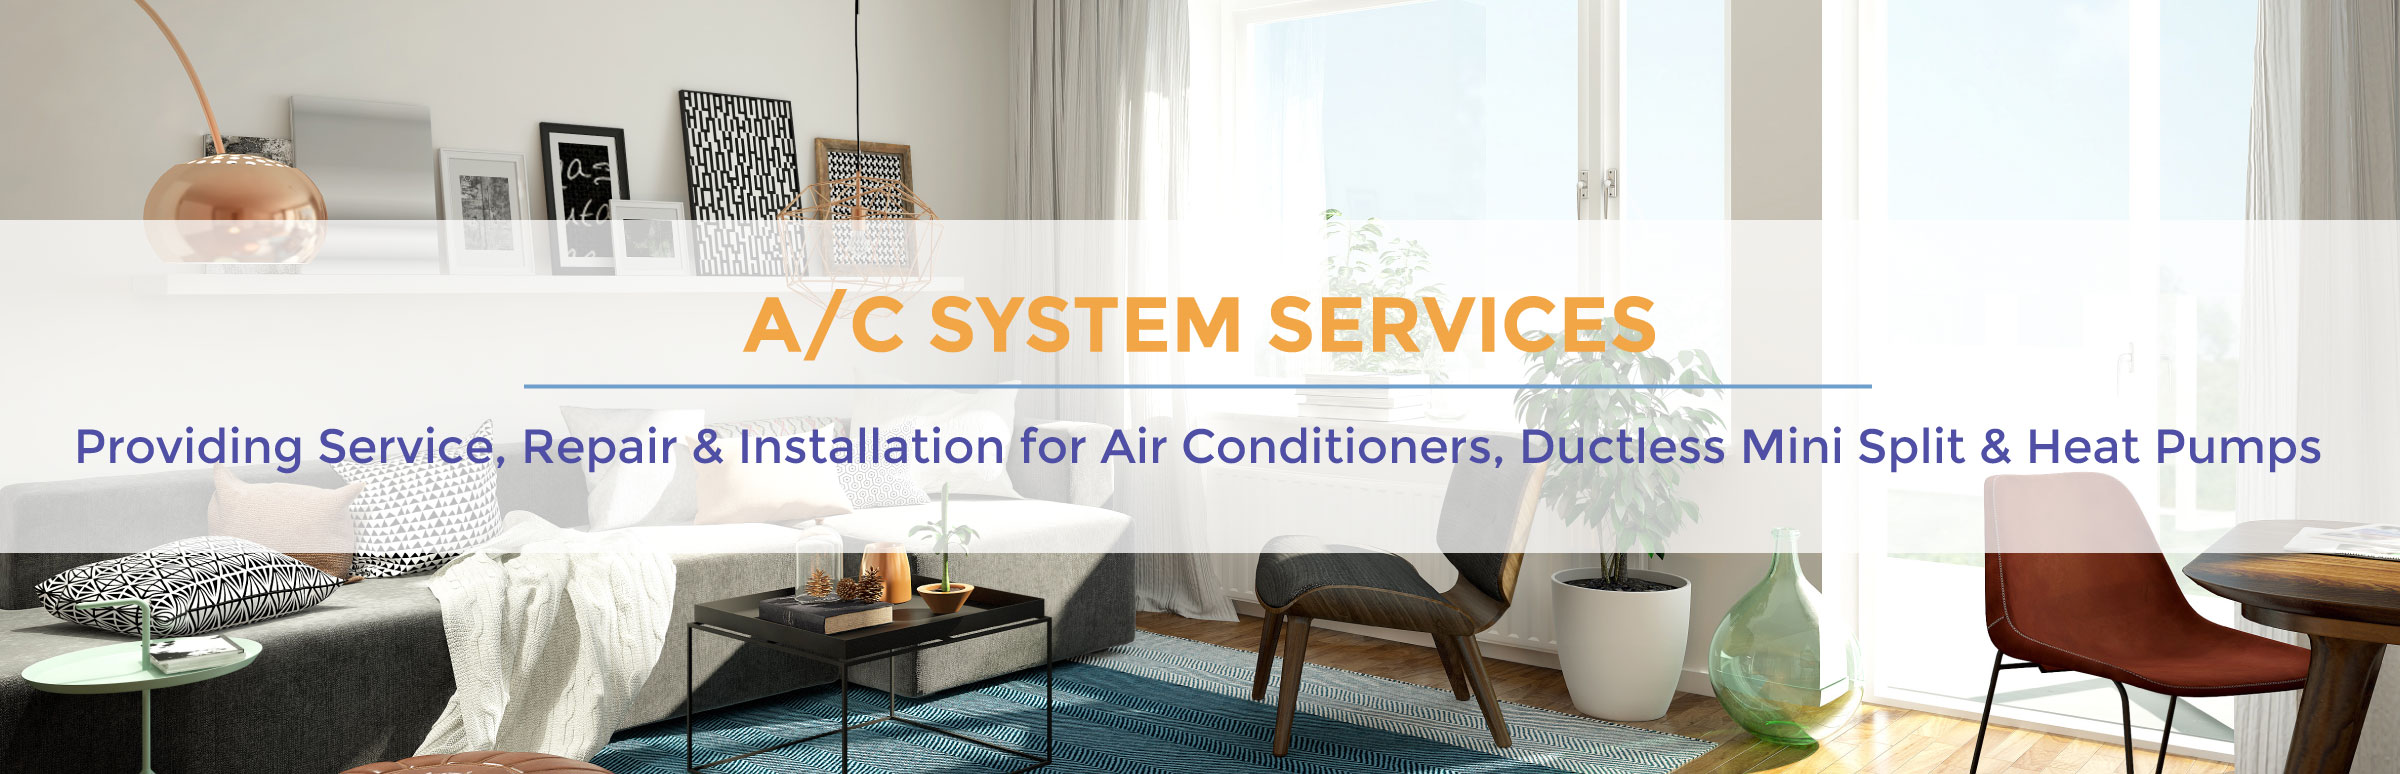 We provide service and repair for air conditioners, ductless split systems and heat pumps!